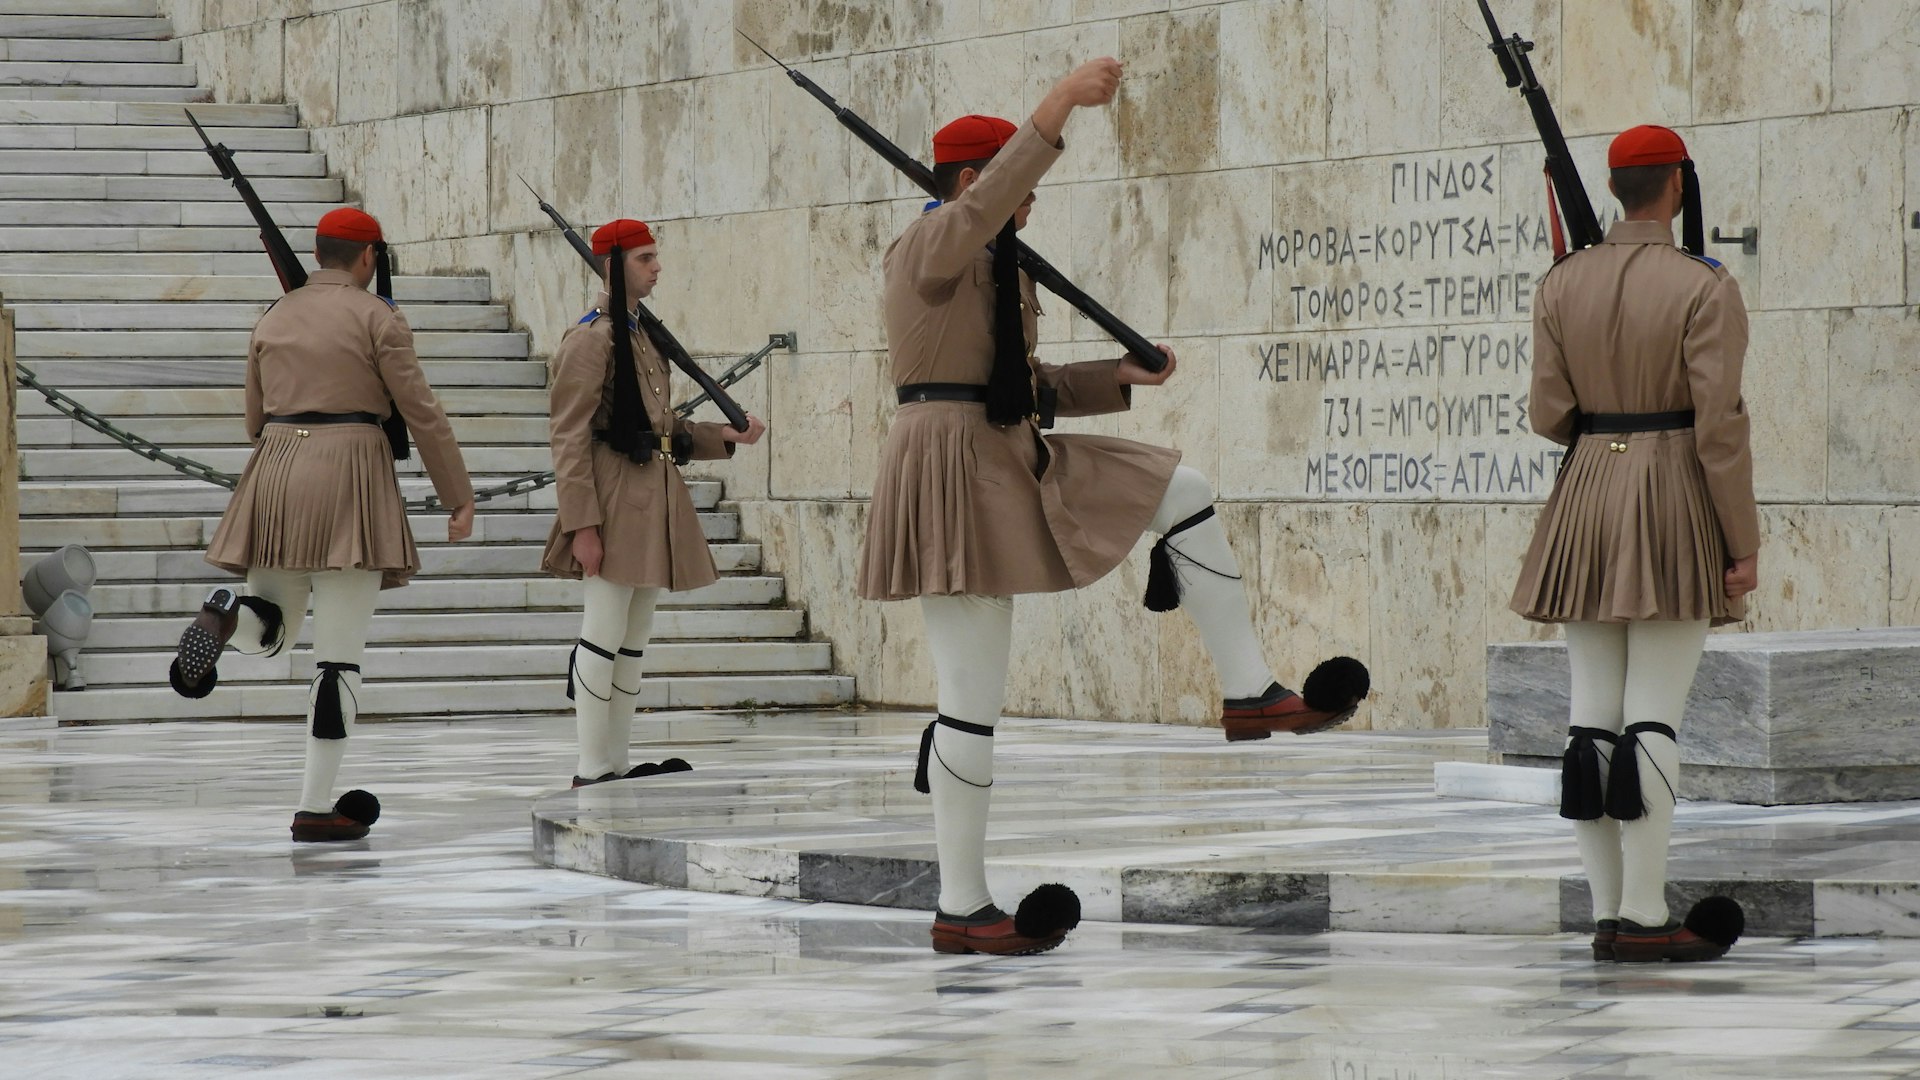 Syntagma Square and the Changing of the Guard